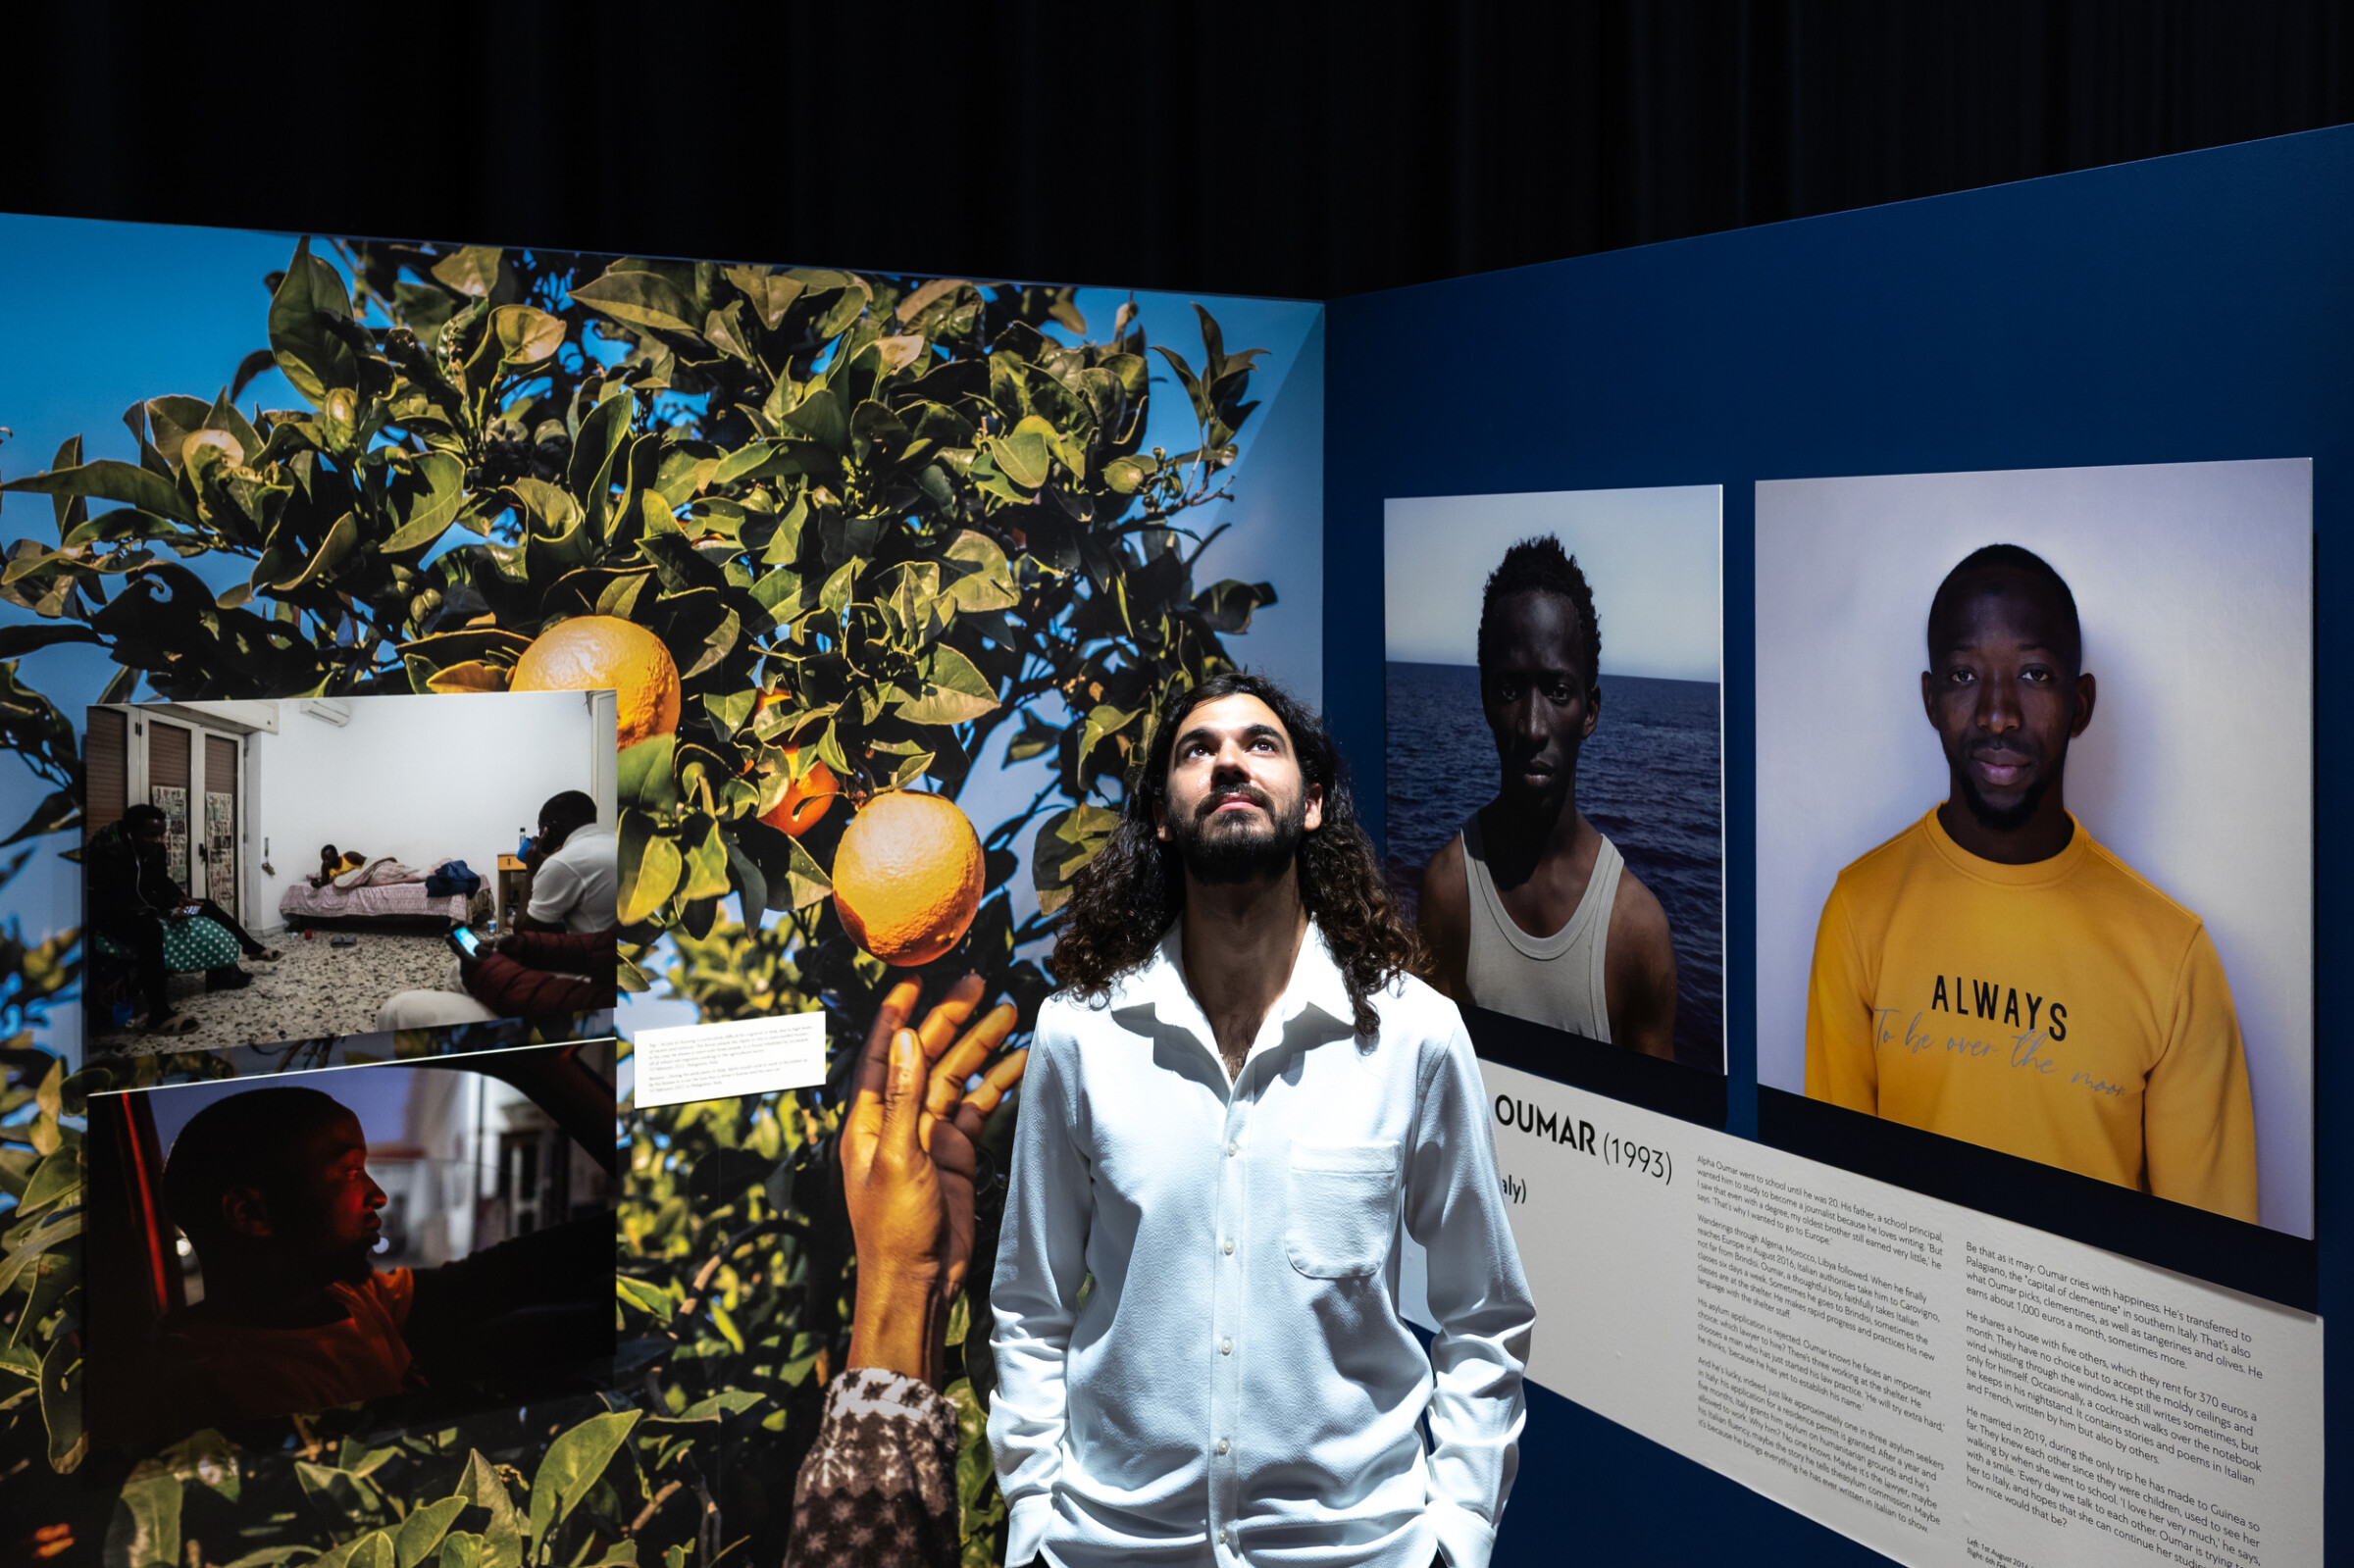 This image, taken in the context of the iMEdD International Journalism Forum, shows Spanish-Iranian photojournalist Cesar Dezfuli posing among the images of his photo exhibition project entitled "Passengers".